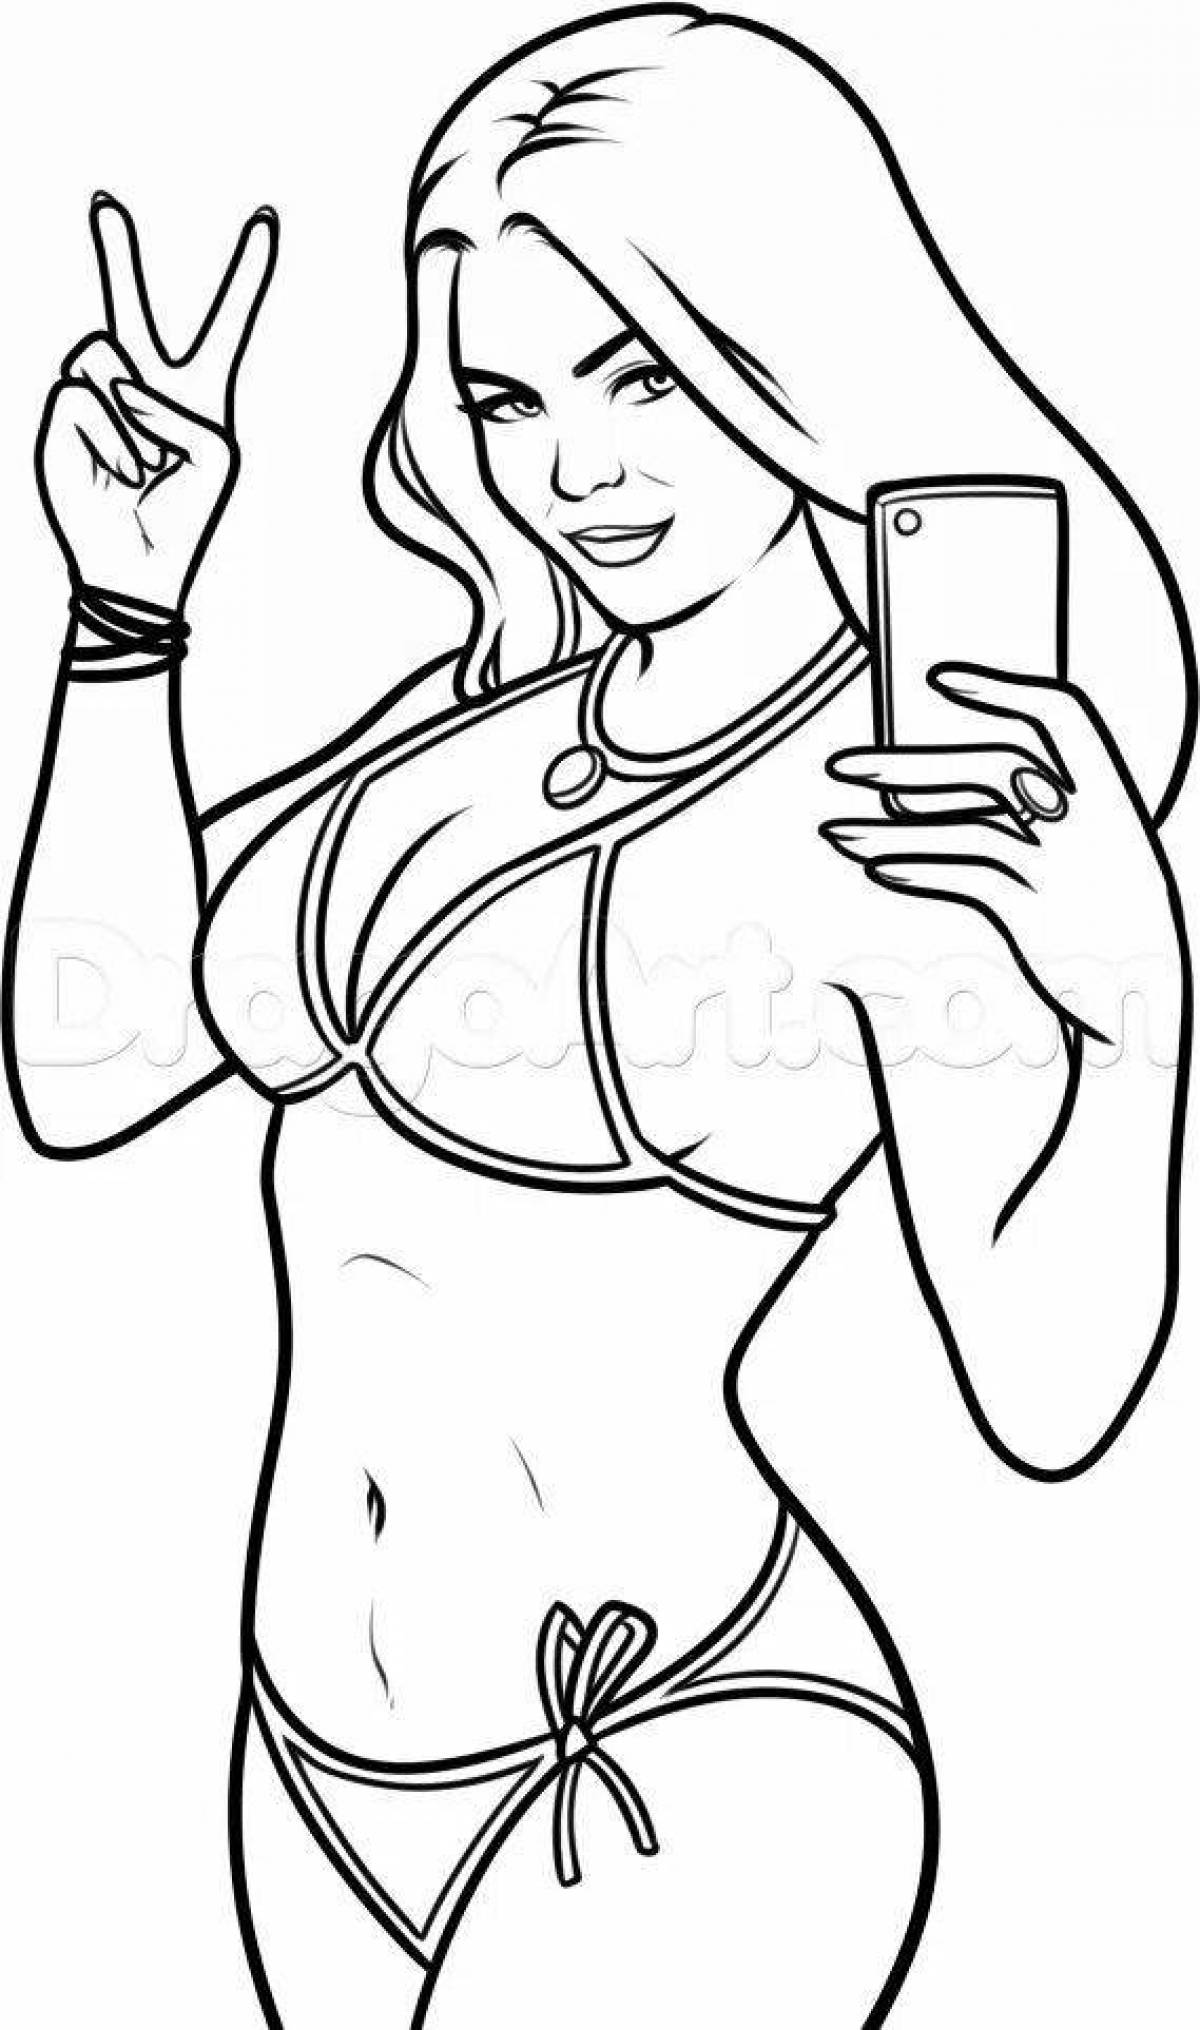 Violent nude girls coloring pages